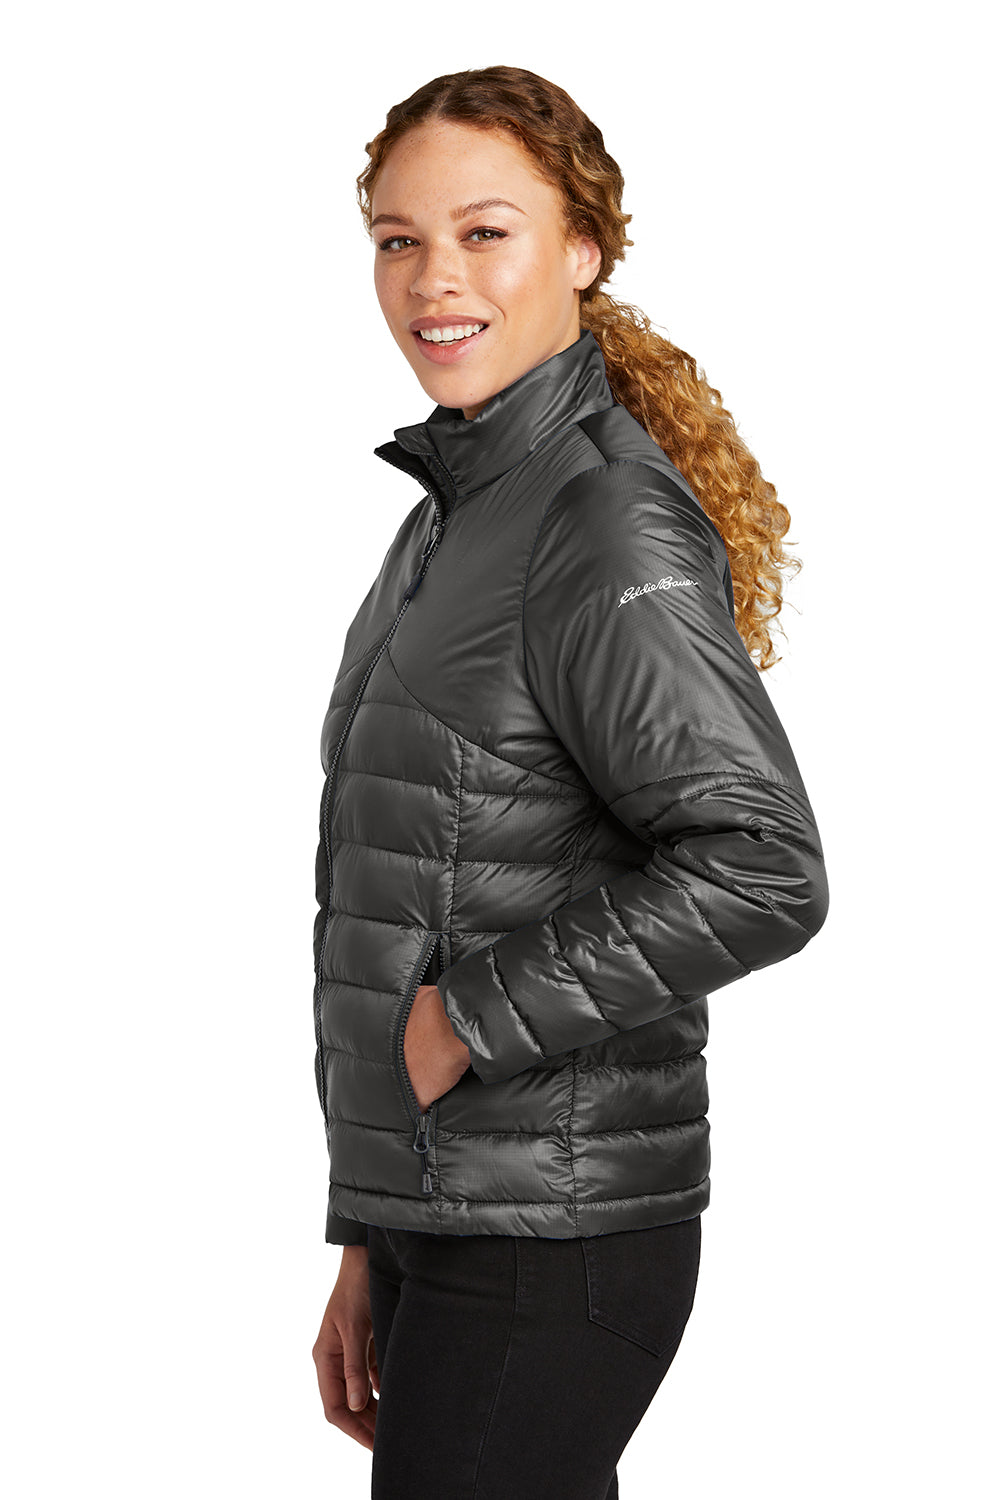 Eddie Bauer EB511 Womens Water Resistant Quilted Full Zip Jacket Iron Gate Grey Model Side